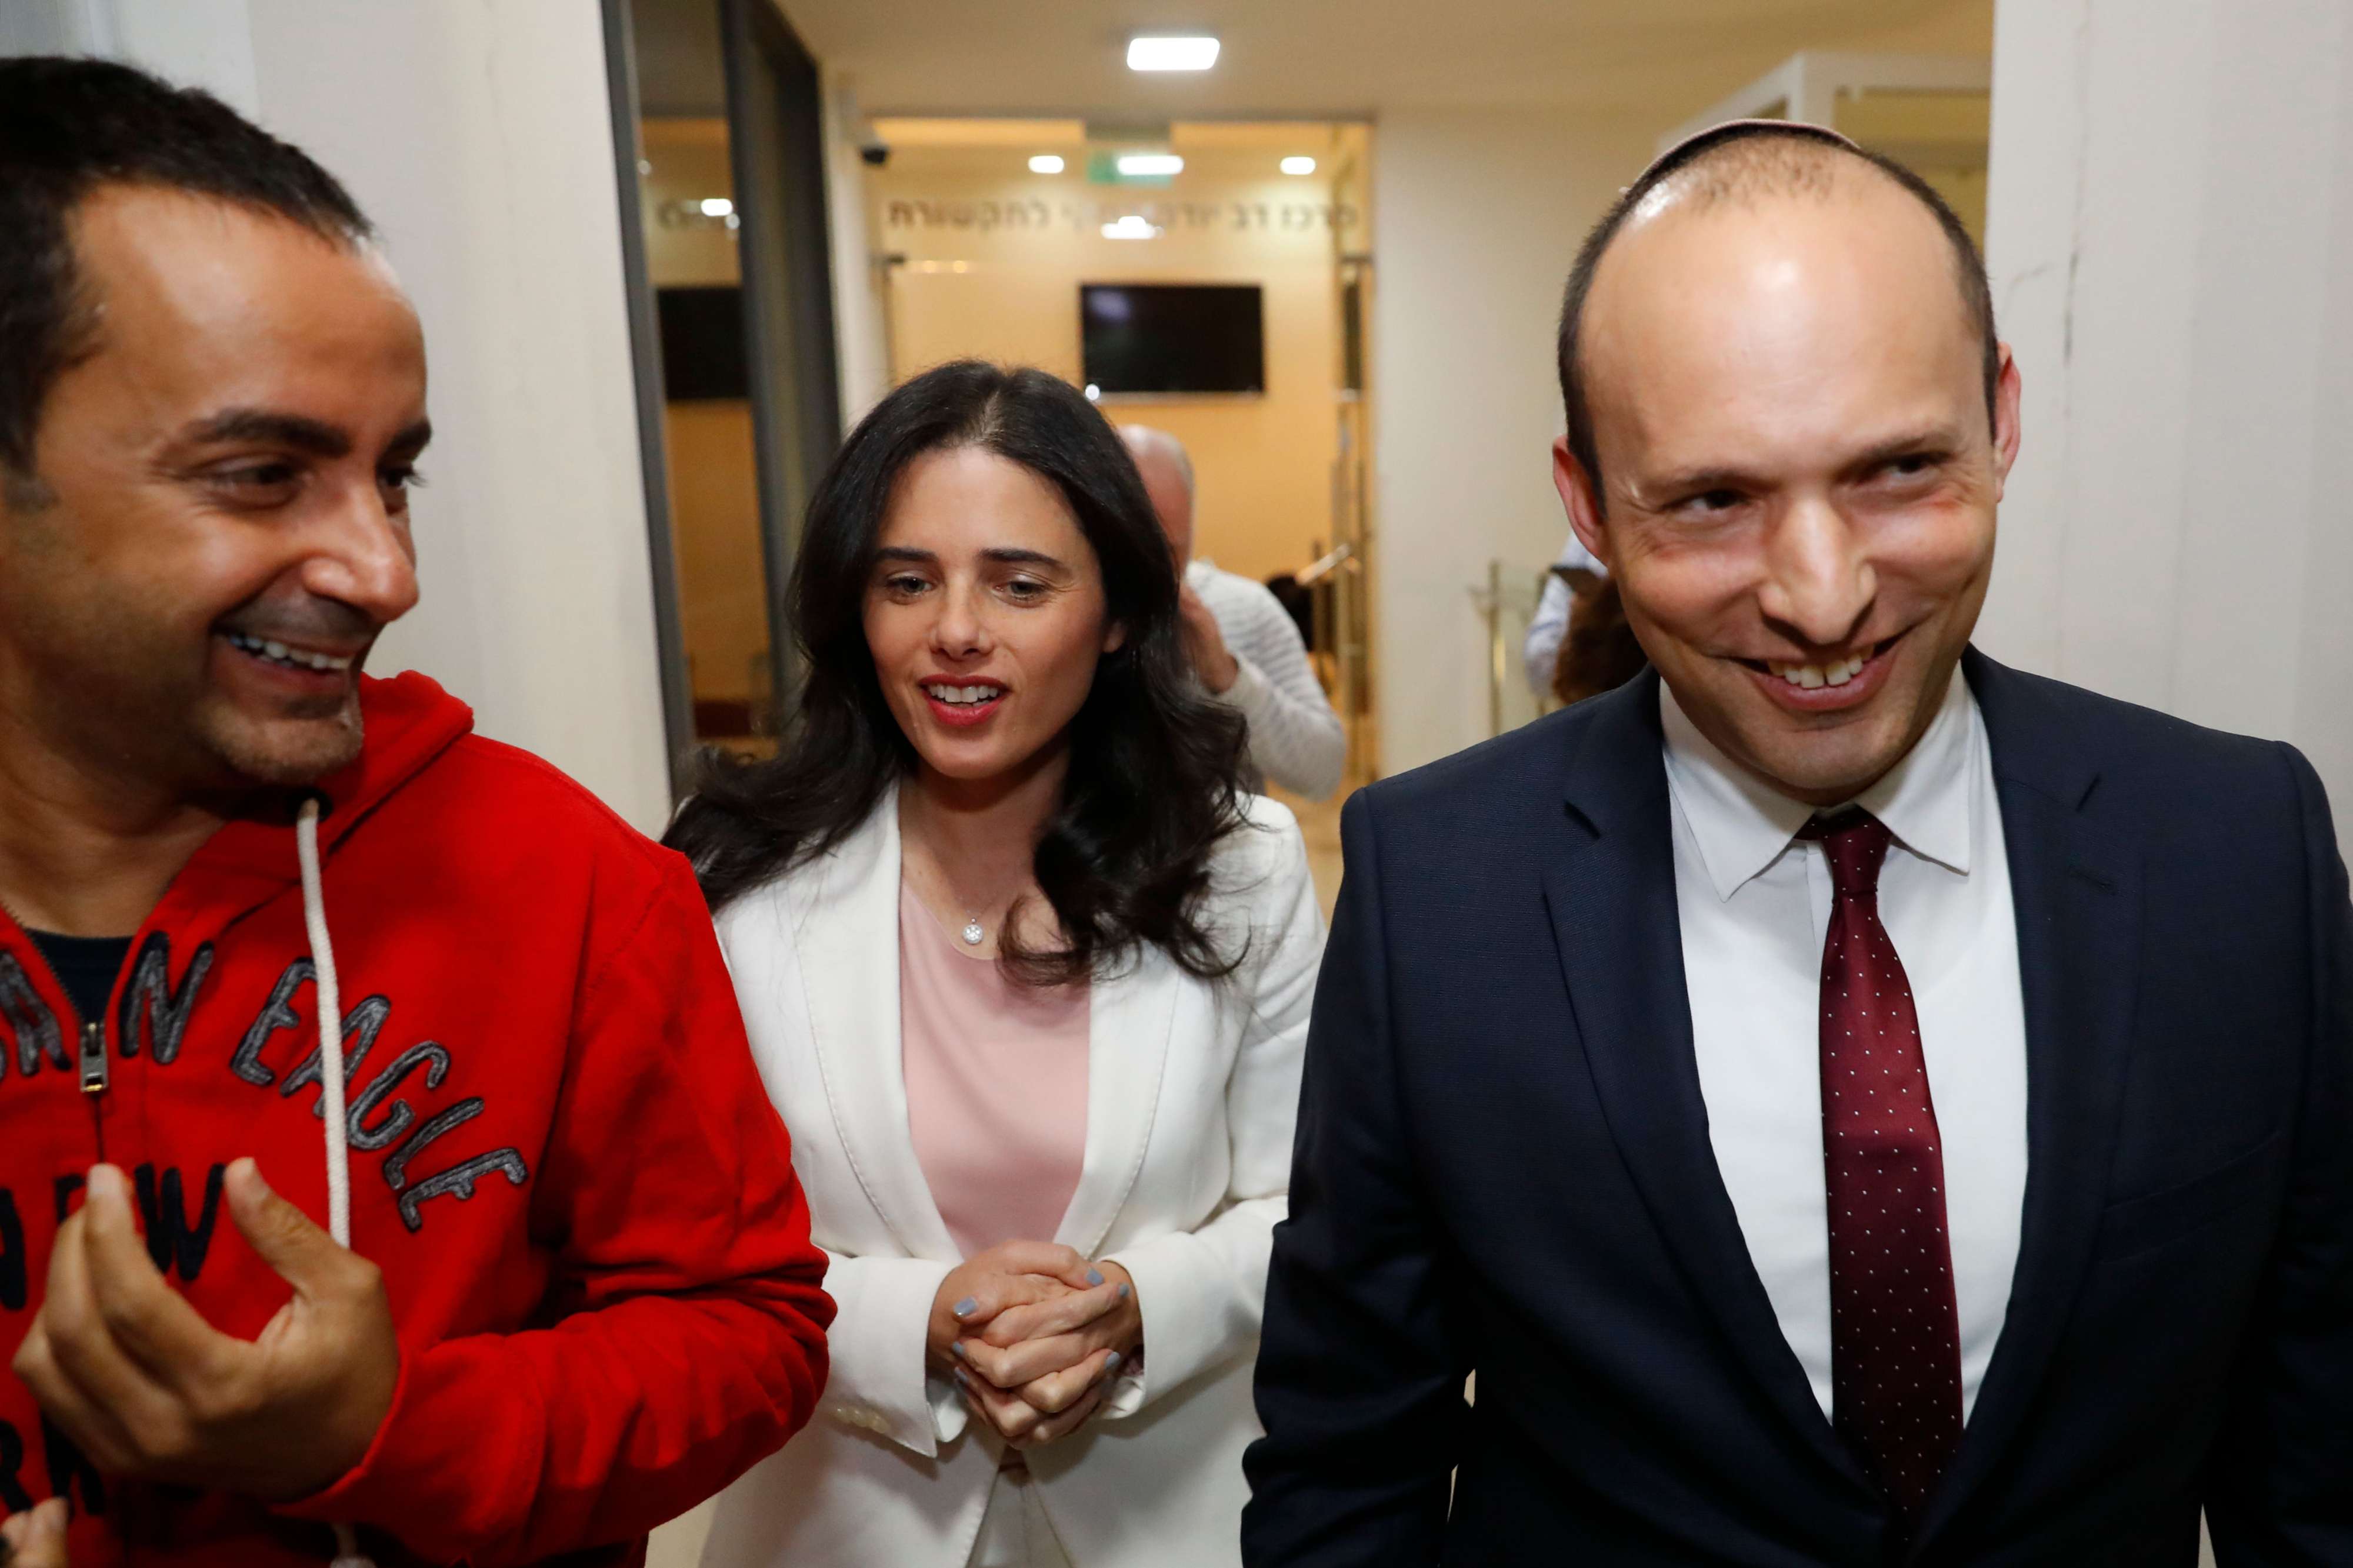 Israel's Minister of Education Naftali Bennett (R) and Israeli Justice Minister Ayelet Shaked (C) walk during a press conference to announce the formation of new political party HaYemin HeHadash or The New Right on December 29, 2018 in the coastal city of Tel Aviv.